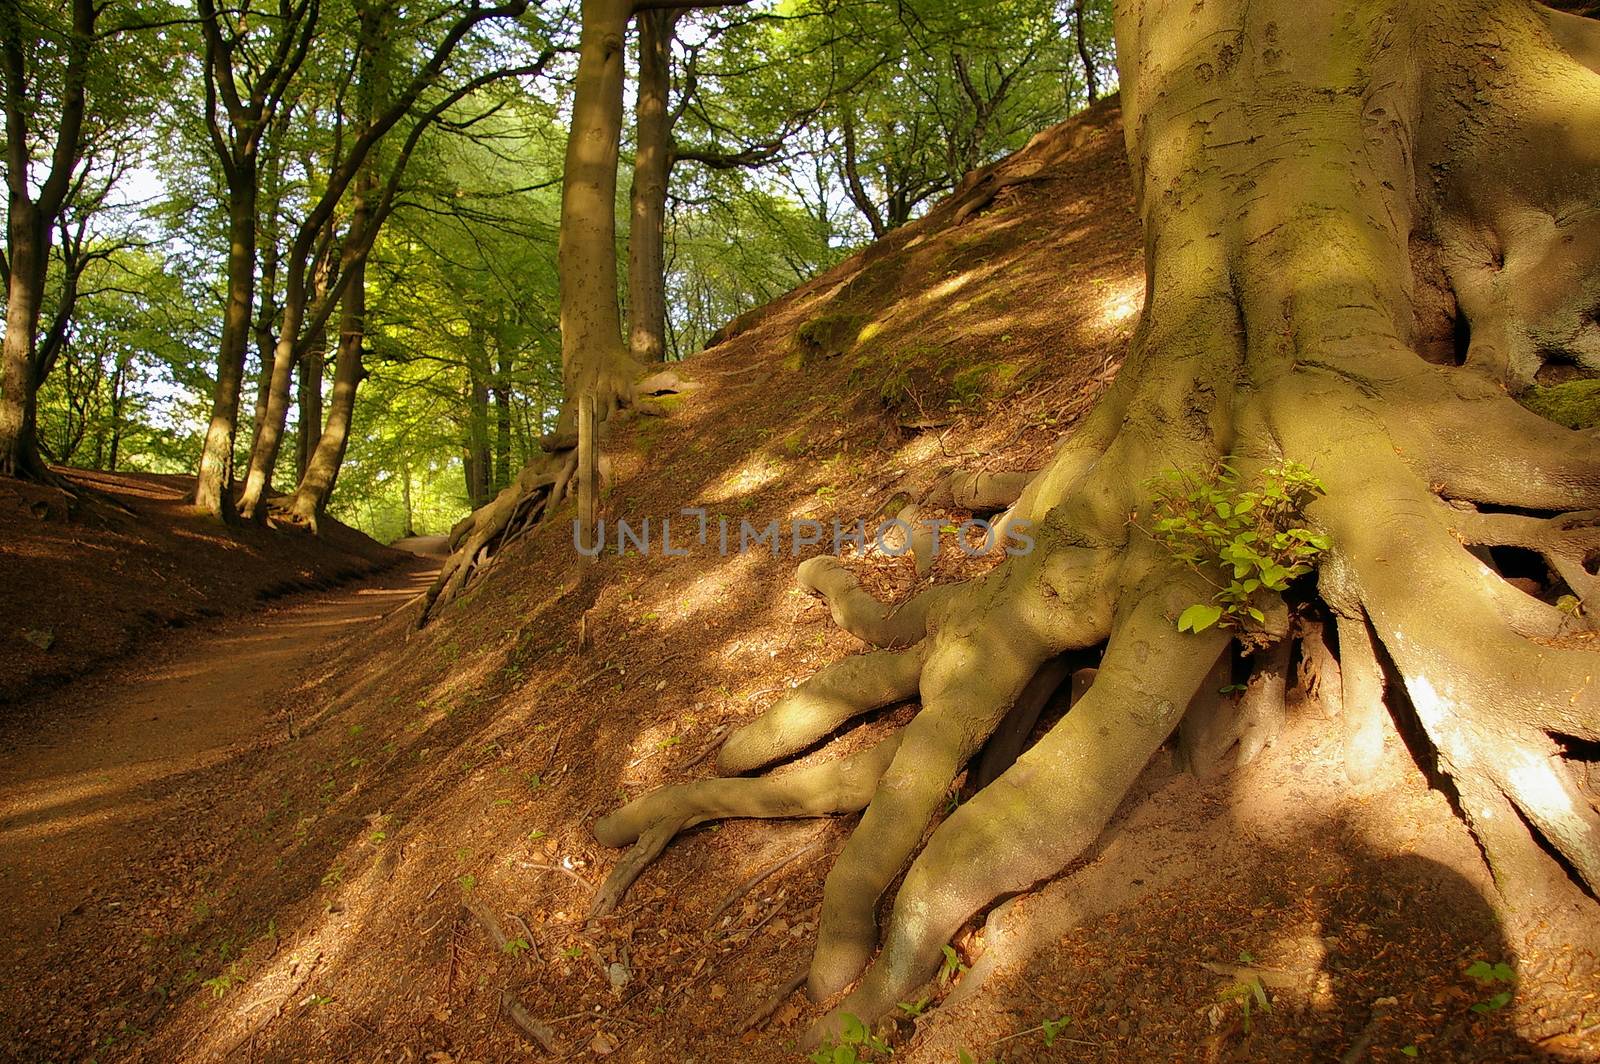 Exposed tree roots in Prestwich Clough, Manchester, UK